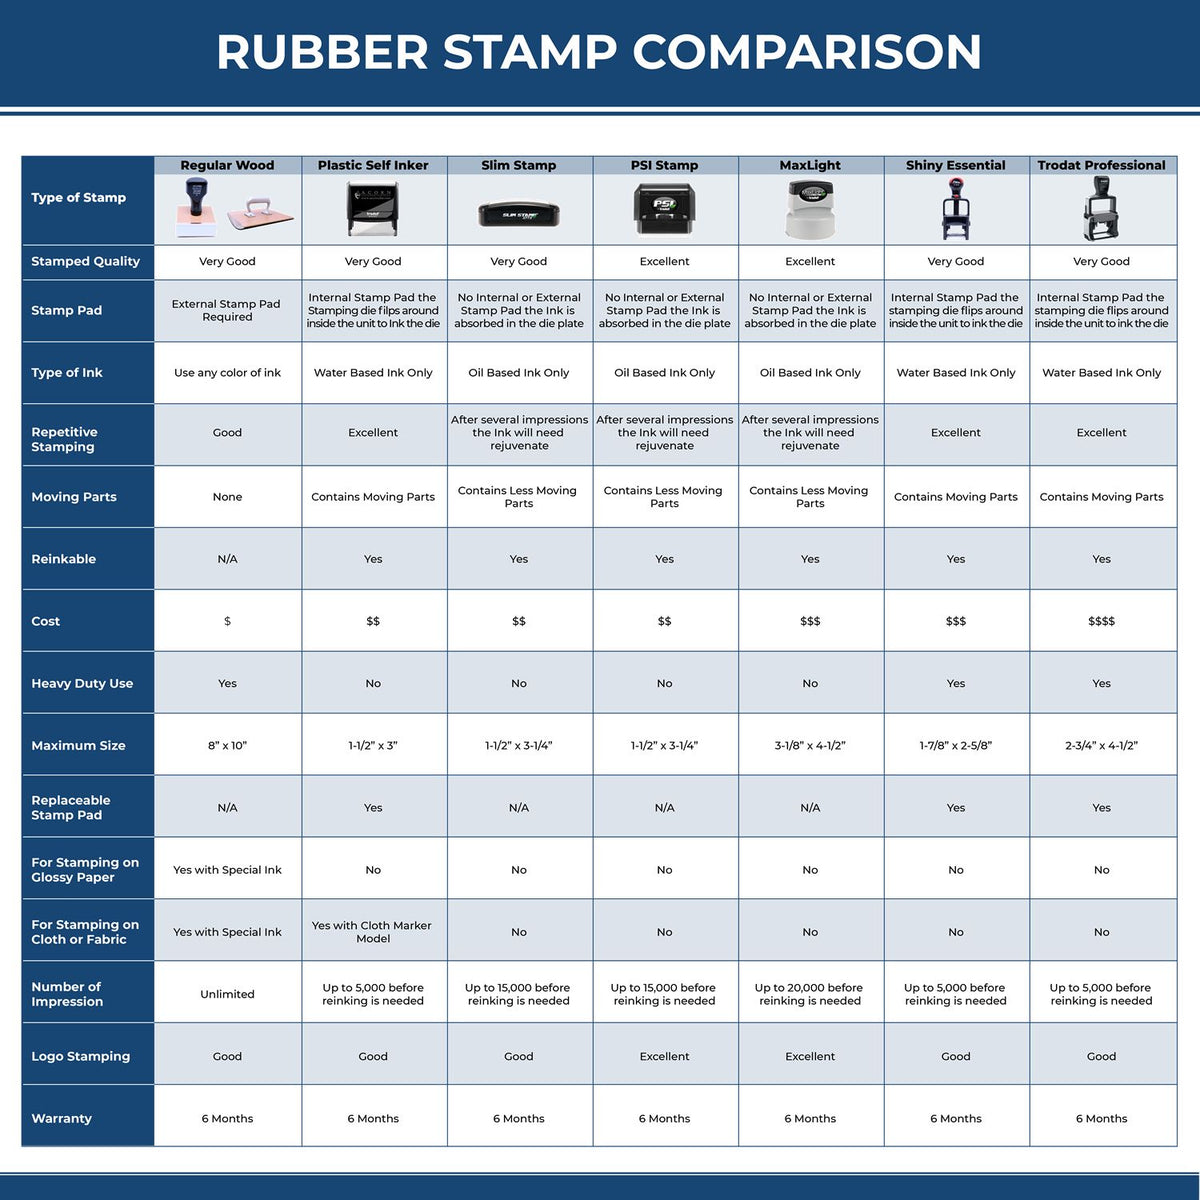 A comparison chart for the different types of mount models available for the Self-Inking Kentucky PE Stamp.